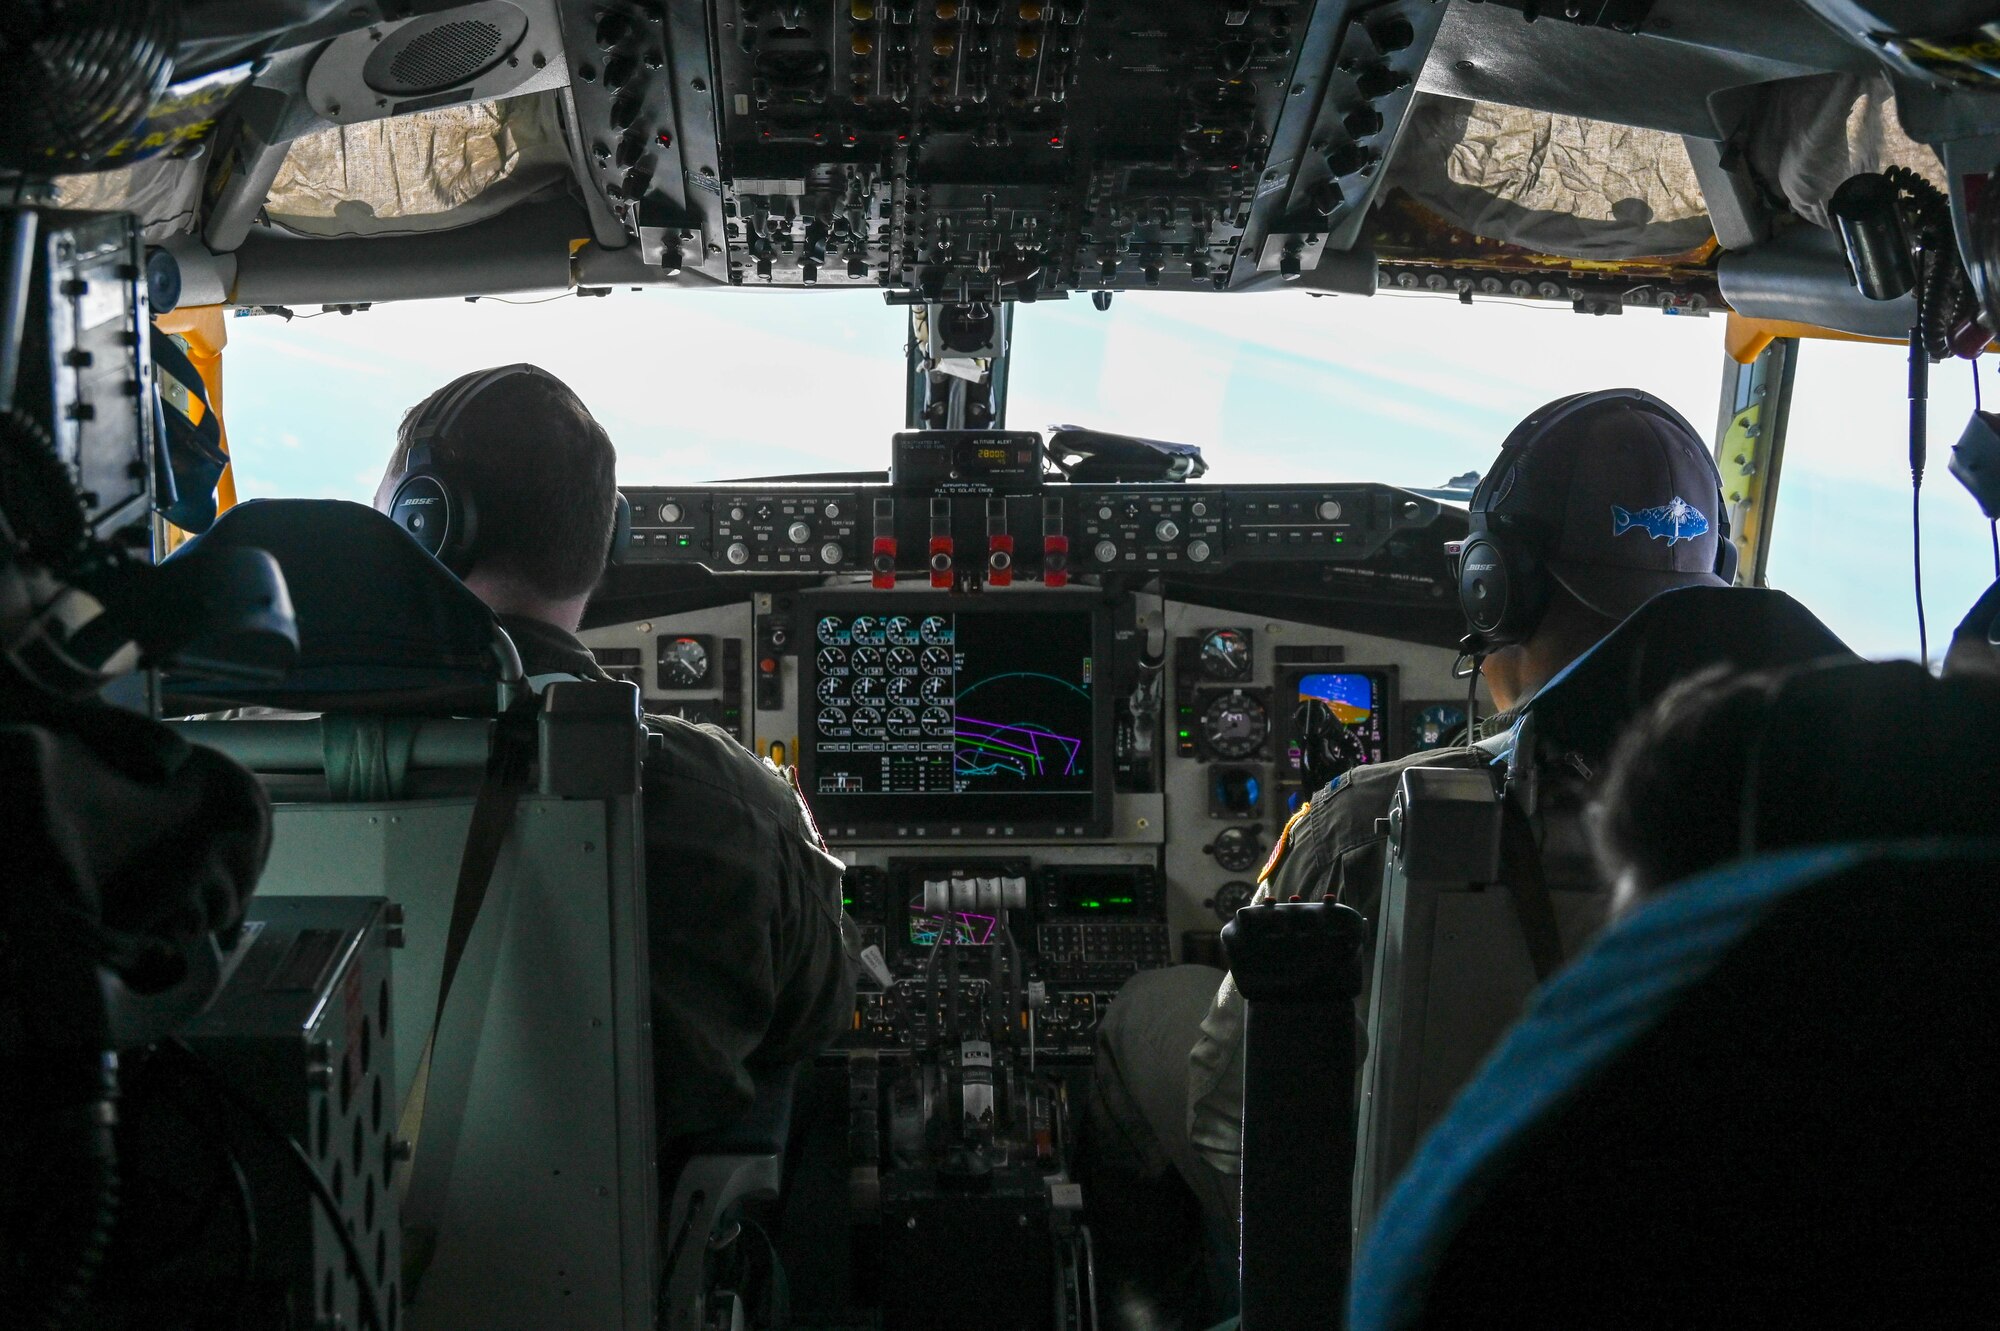 Pilots from the 465th Air Refueling Squadron, Tinker Air Force Base, Oklahoma, fly a KC-135 Stratotanker over Florida during a business effort with the 482nd Fighter Wing, Homestead Air Reserve Base, Florida, Jan 27, 2021. This business effort training mission ensured that aircrew on multiple platforms received the necessary upgrade and competency training required to remain fully mission capable. (U.S. Air Force photo by Senior Airman Mary Begy)